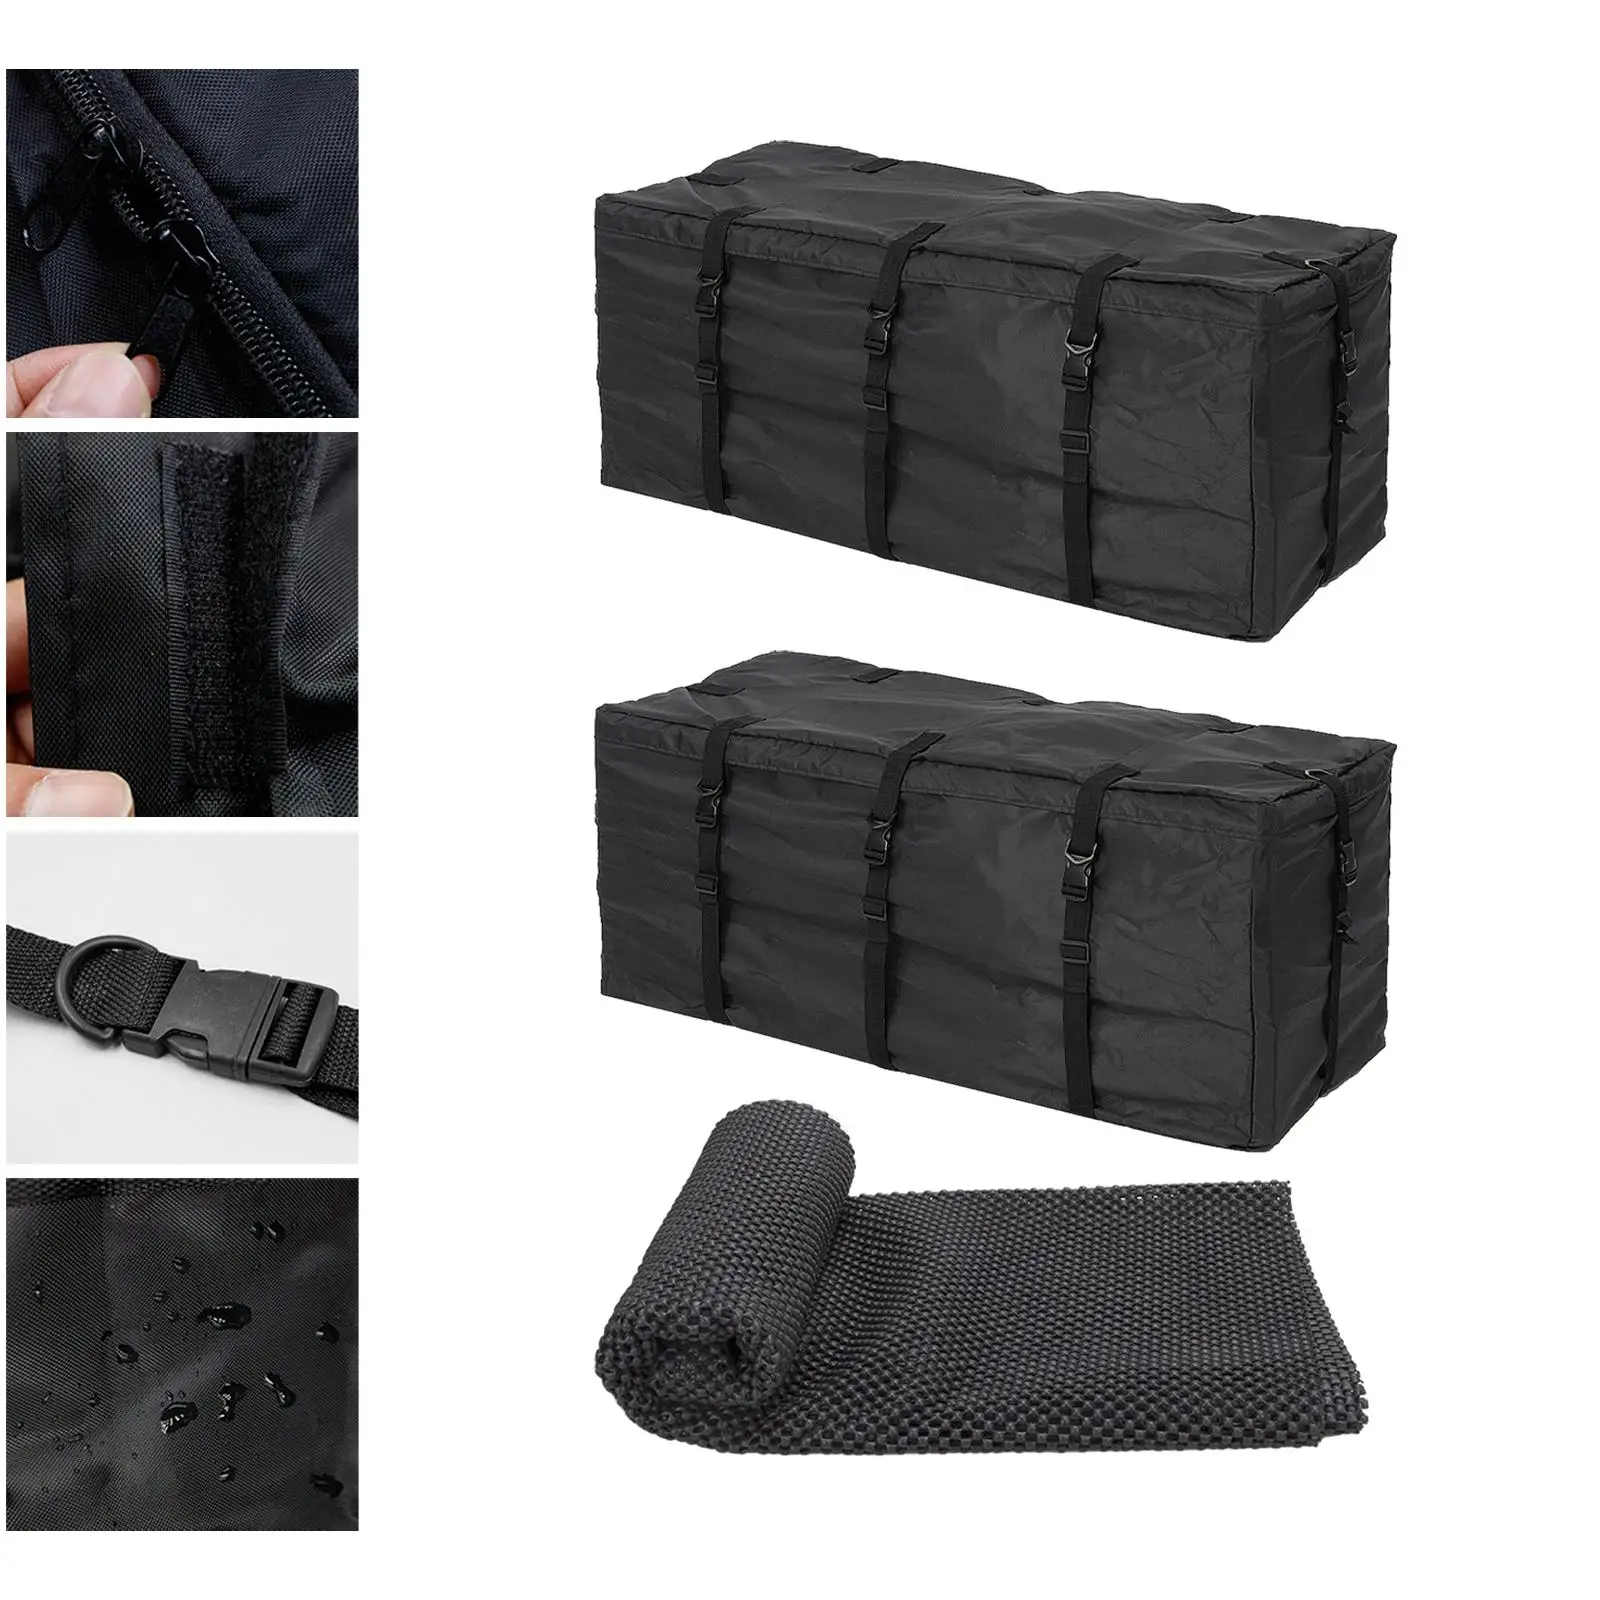 Rooftop Cargo Carrier Bag Luggage Storage Waterproof Carrier Bag Waterproof Roof Luggage Cargo Carrier Bag for Vehicles SUV